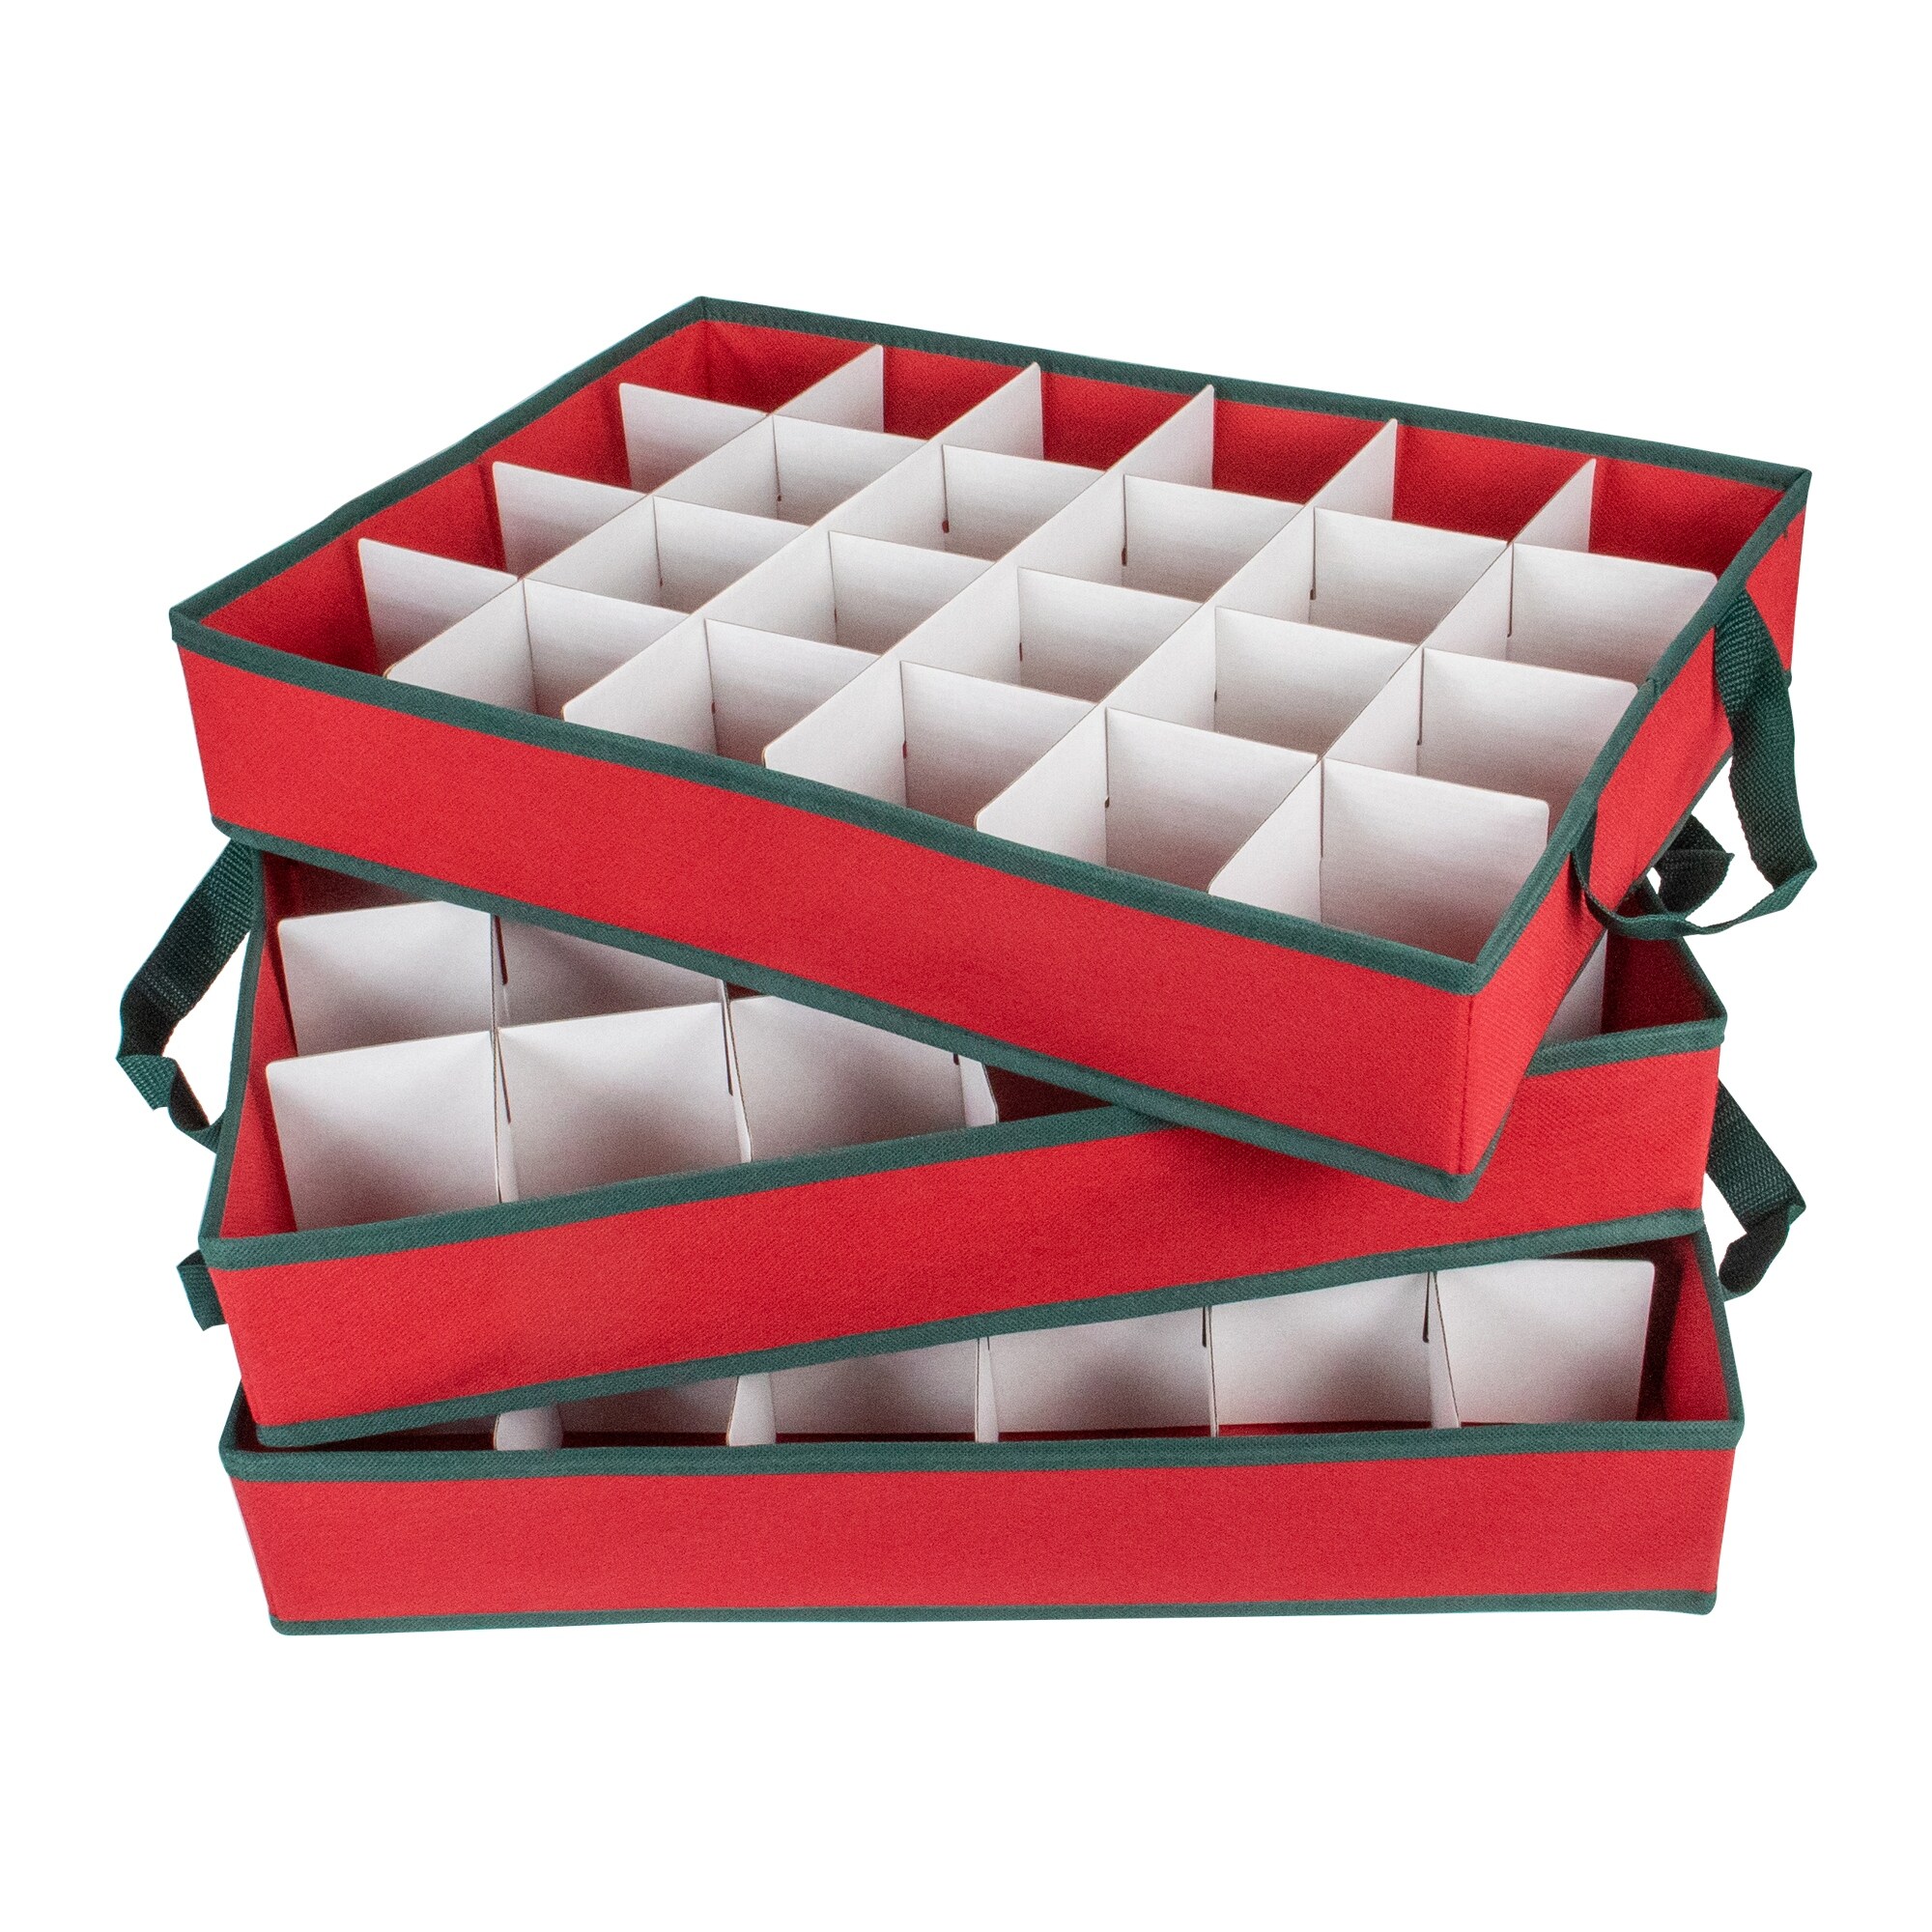 Reviews for Honey-Can-Do Red and Green Plastic Ornament Storage